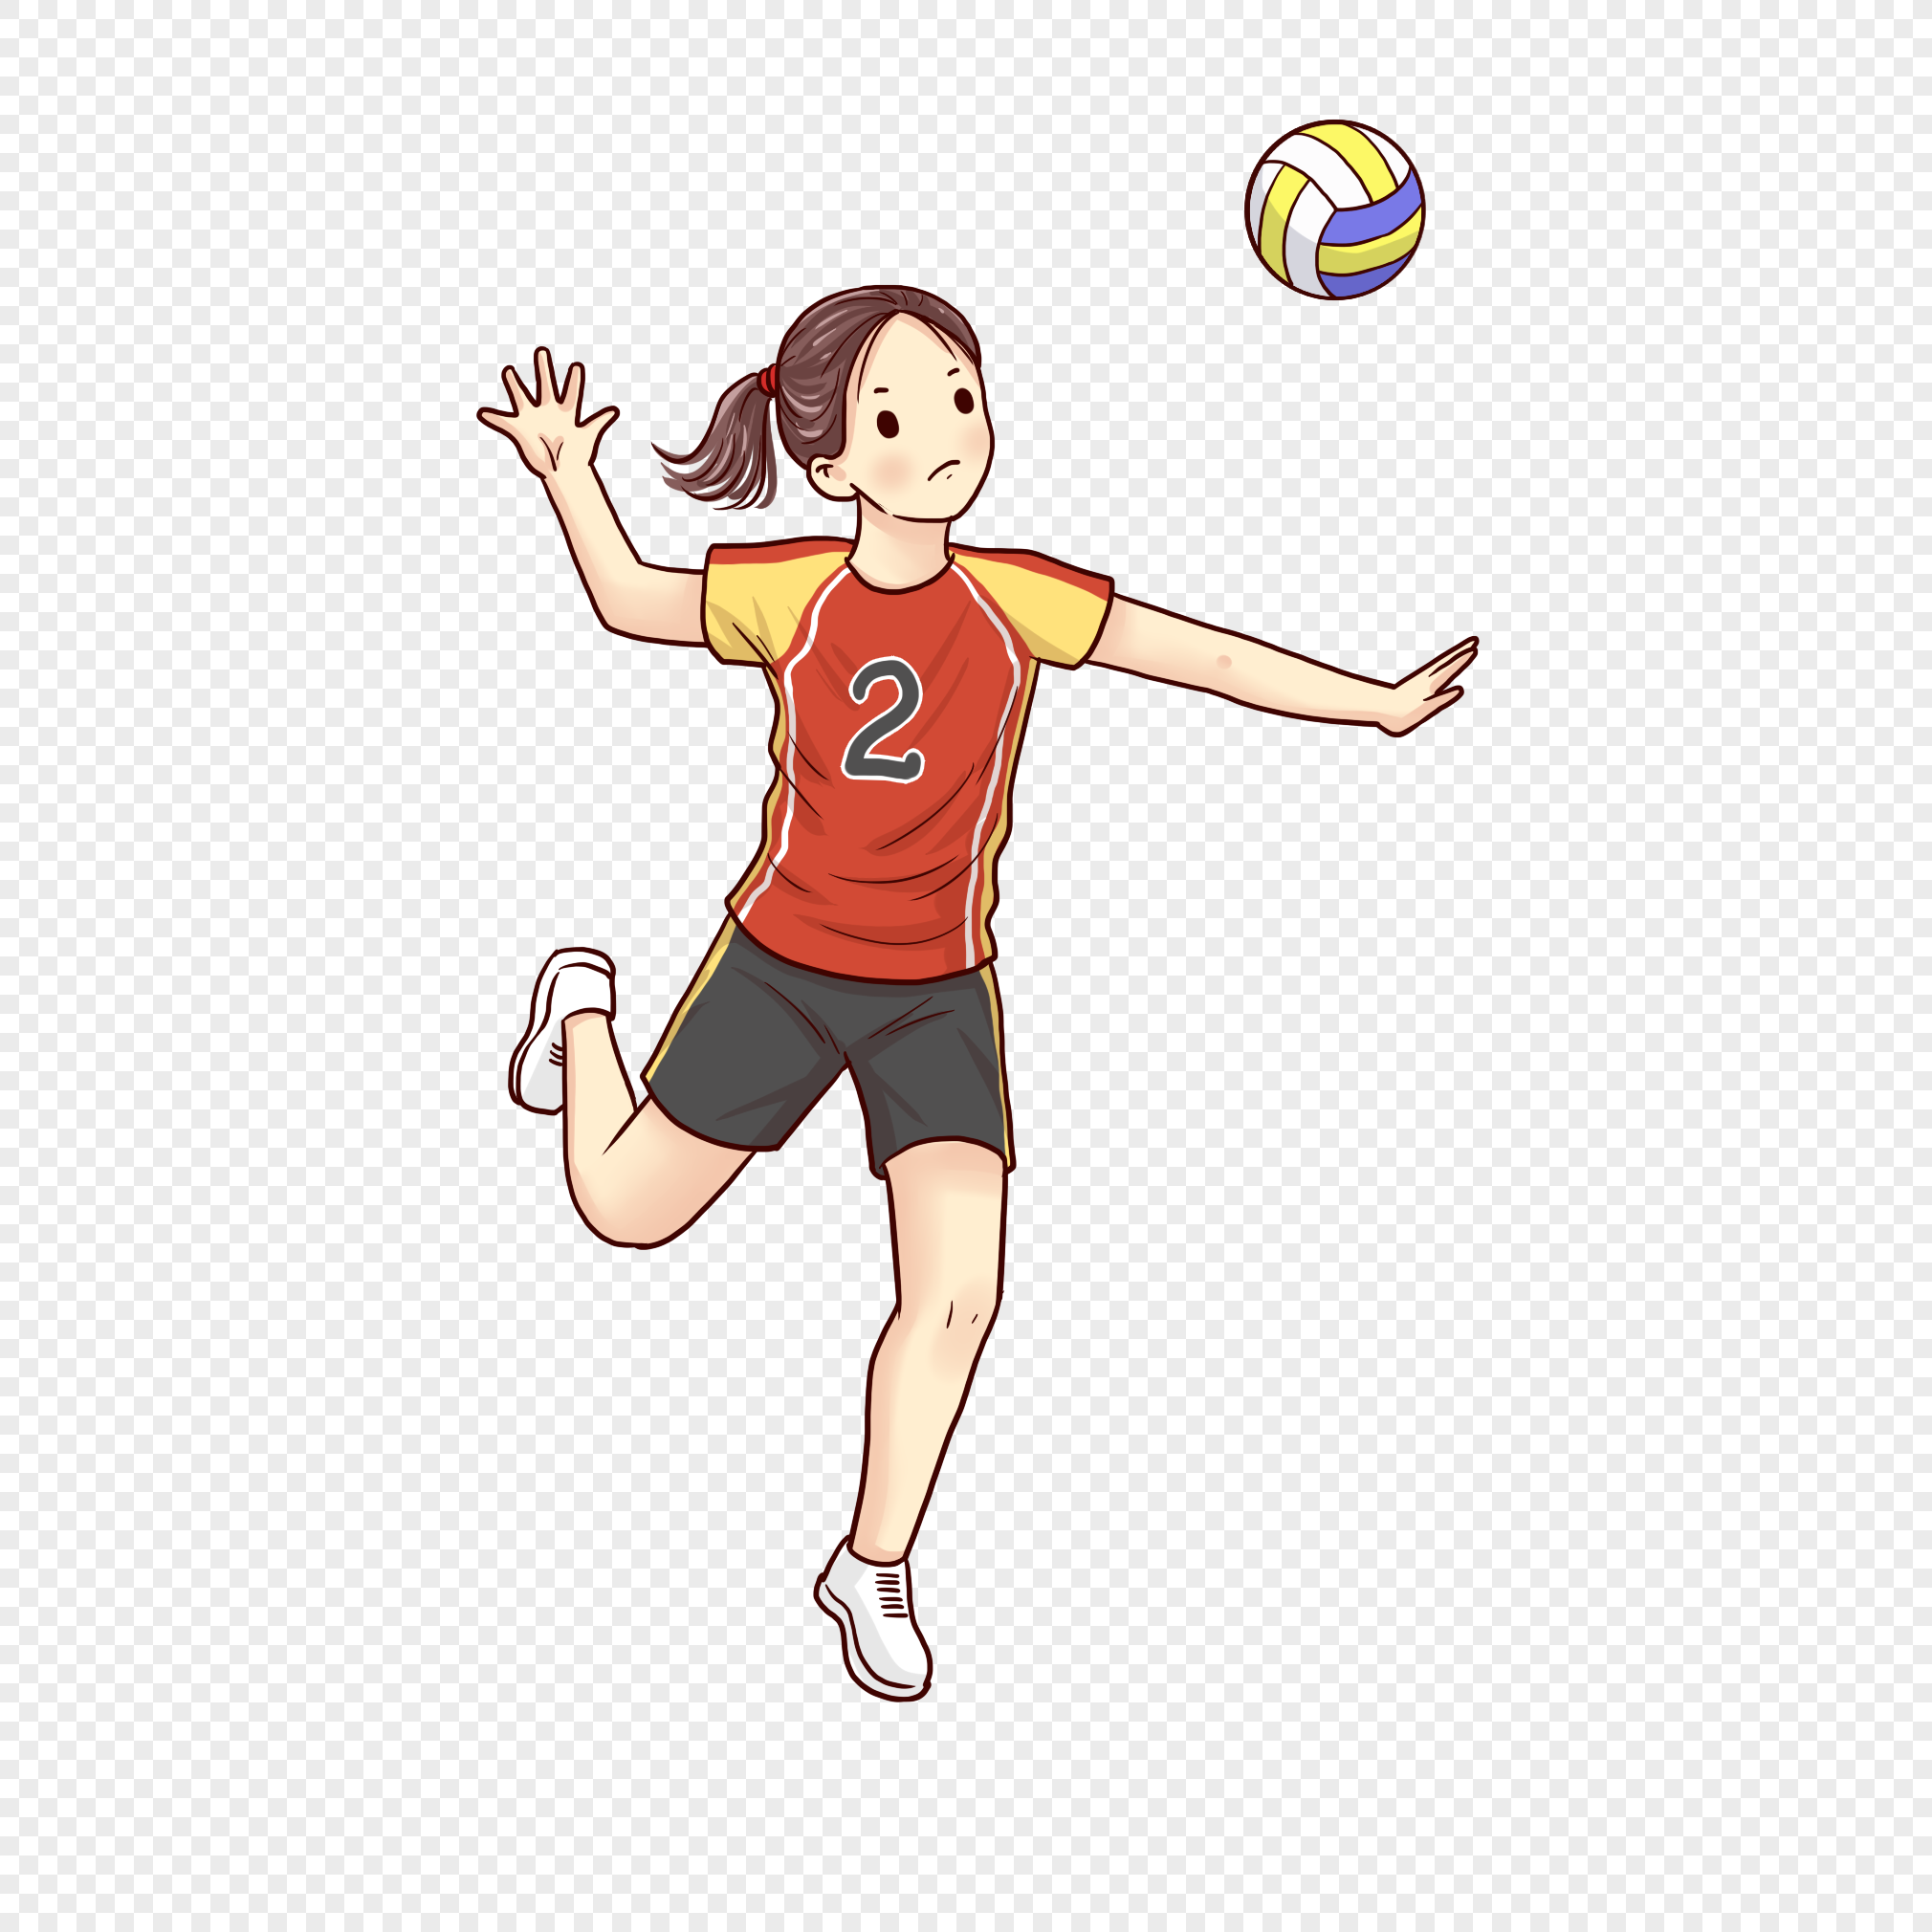 Play Volleyball, Athletes, Olympic Day, Sports PNG Transparent ...